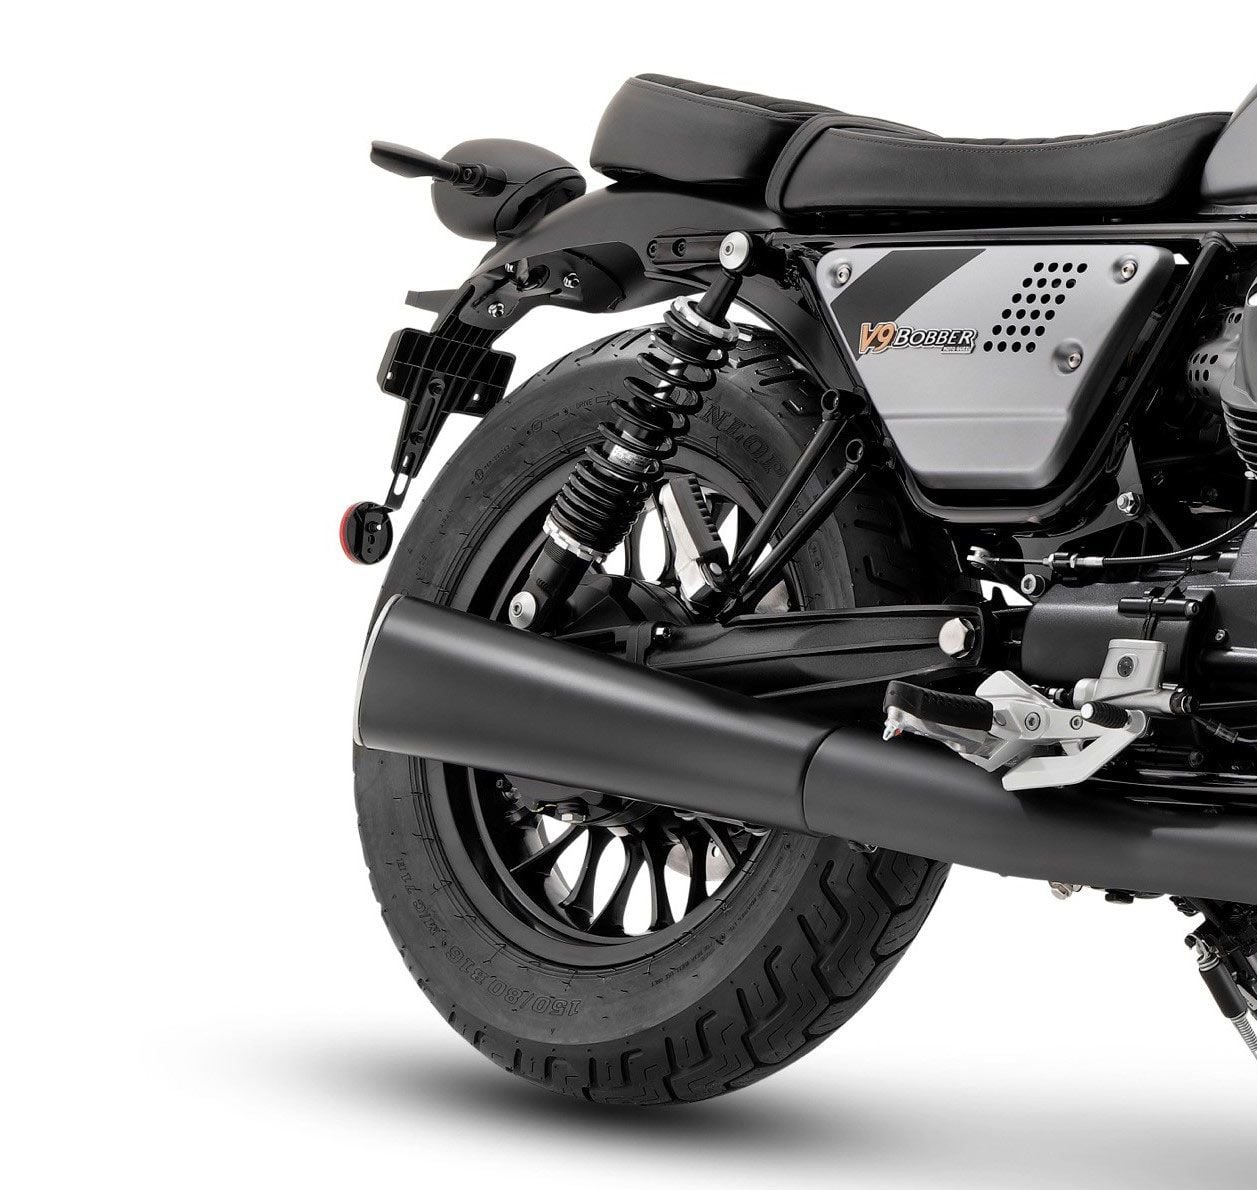 The V9 Bobber Special Edition also features a new black-painted traffic-friendly plug-in muffler.